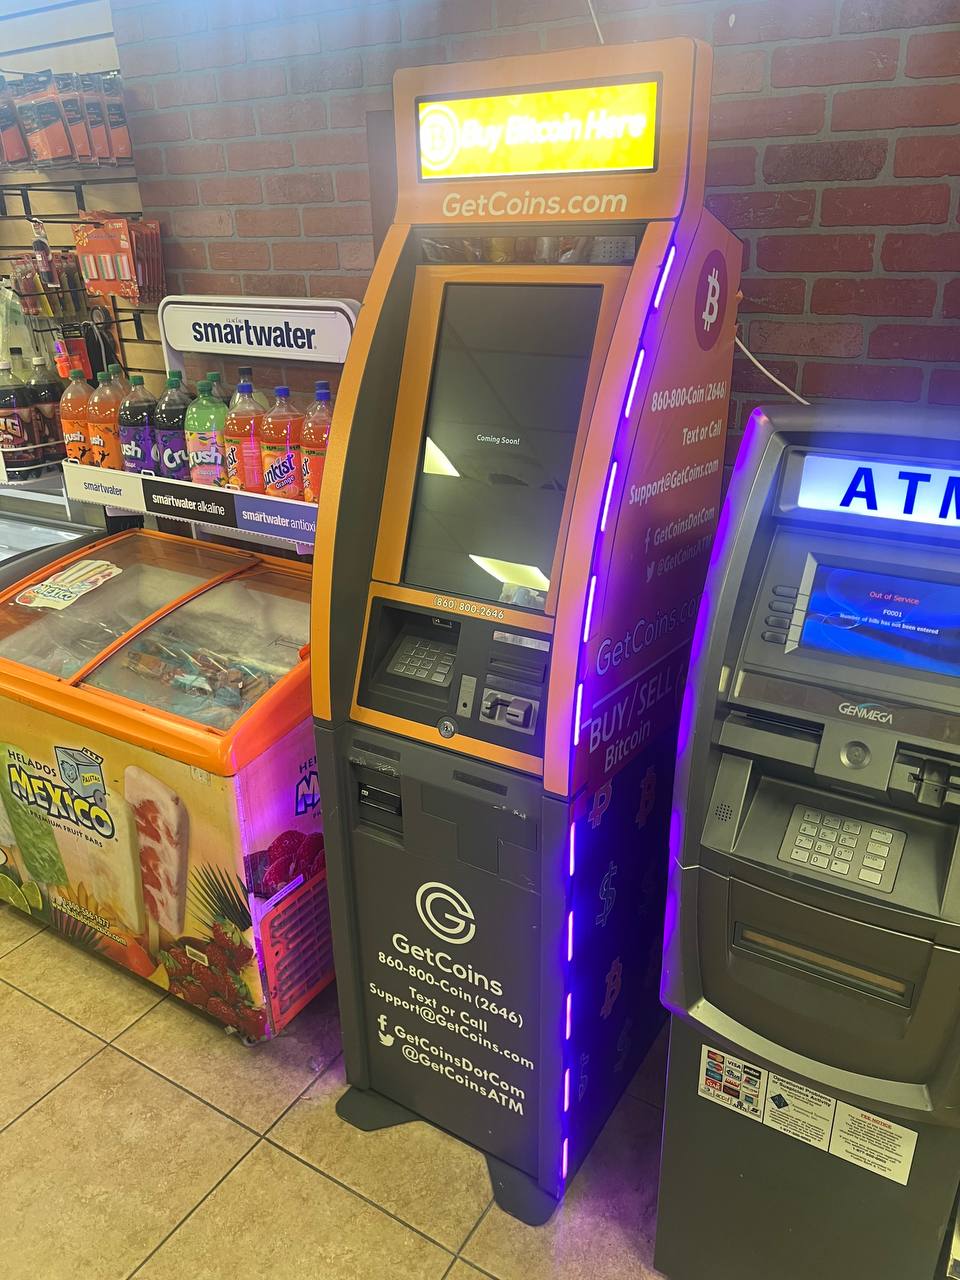 Getcoins - Bitcoin ATM - Inside of Lucky 7 Food Stores in Bakersfield, California